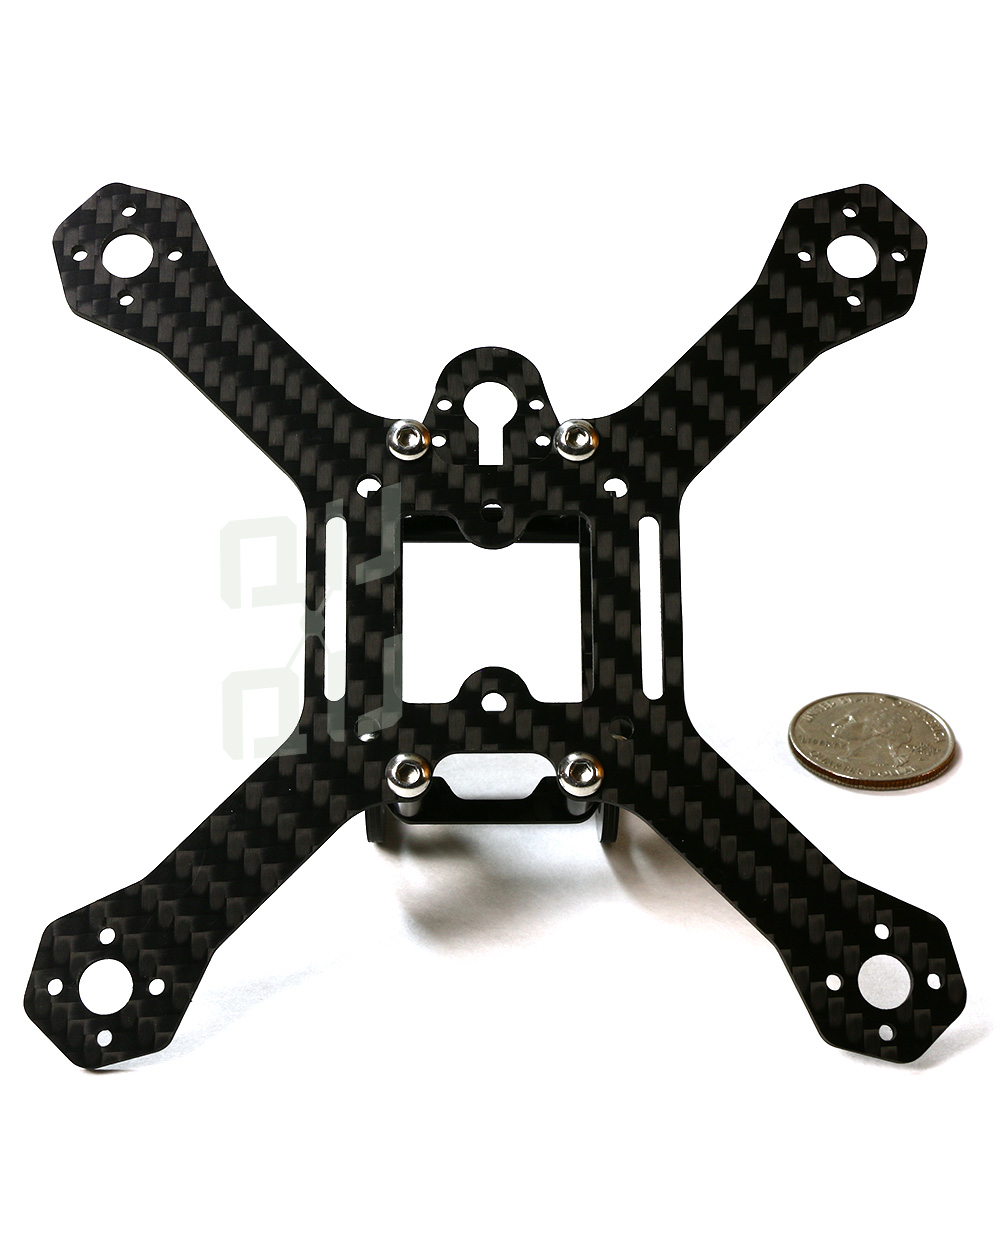 qq130 fully built 3" Racing Drone frame by QuadQuestions Rear bottom view.